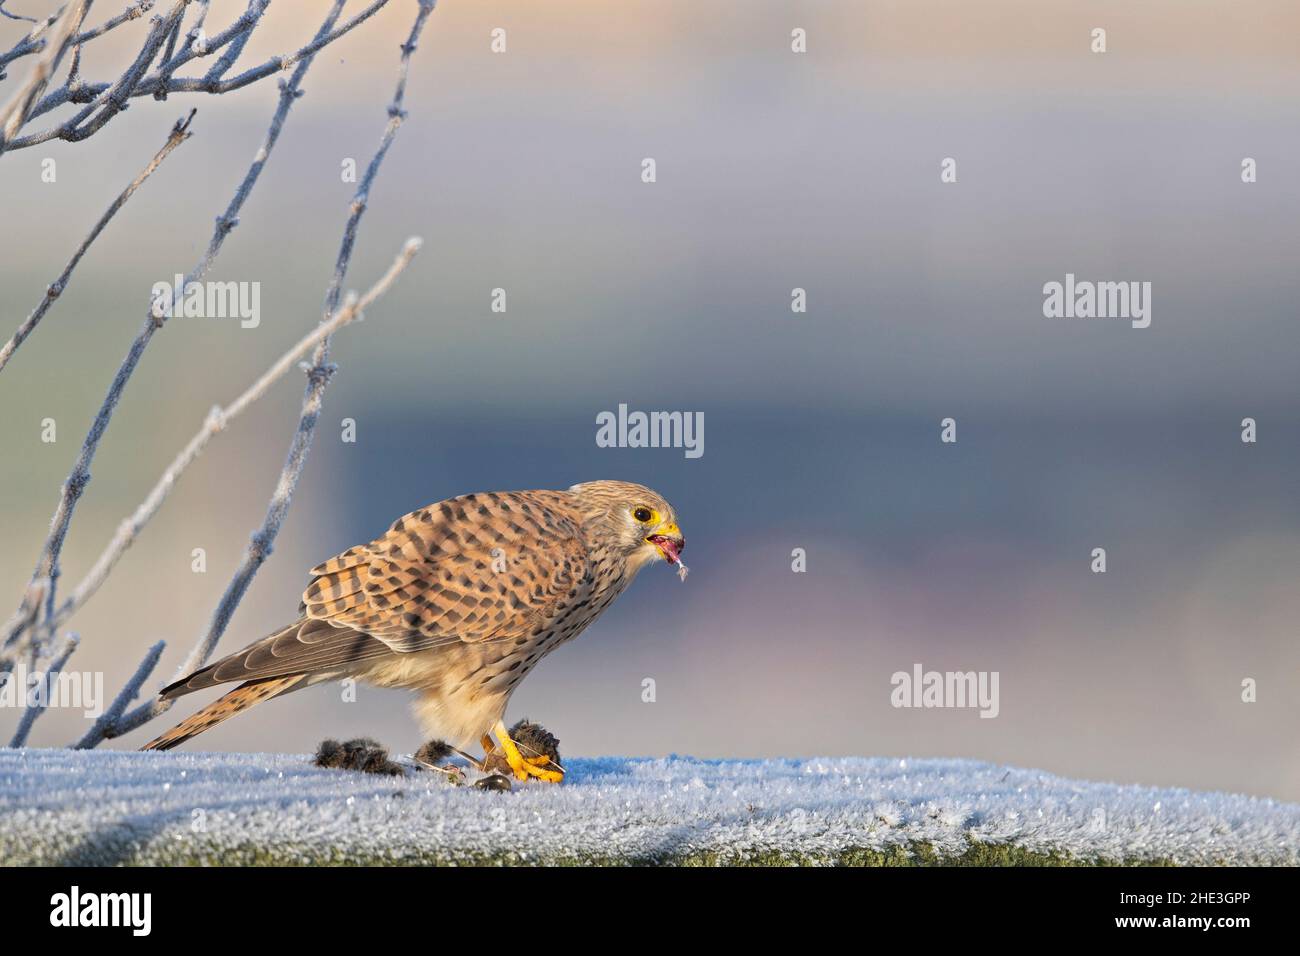 A common kestrel (Falco tinnunculus) eating a mouse. Stock Photo